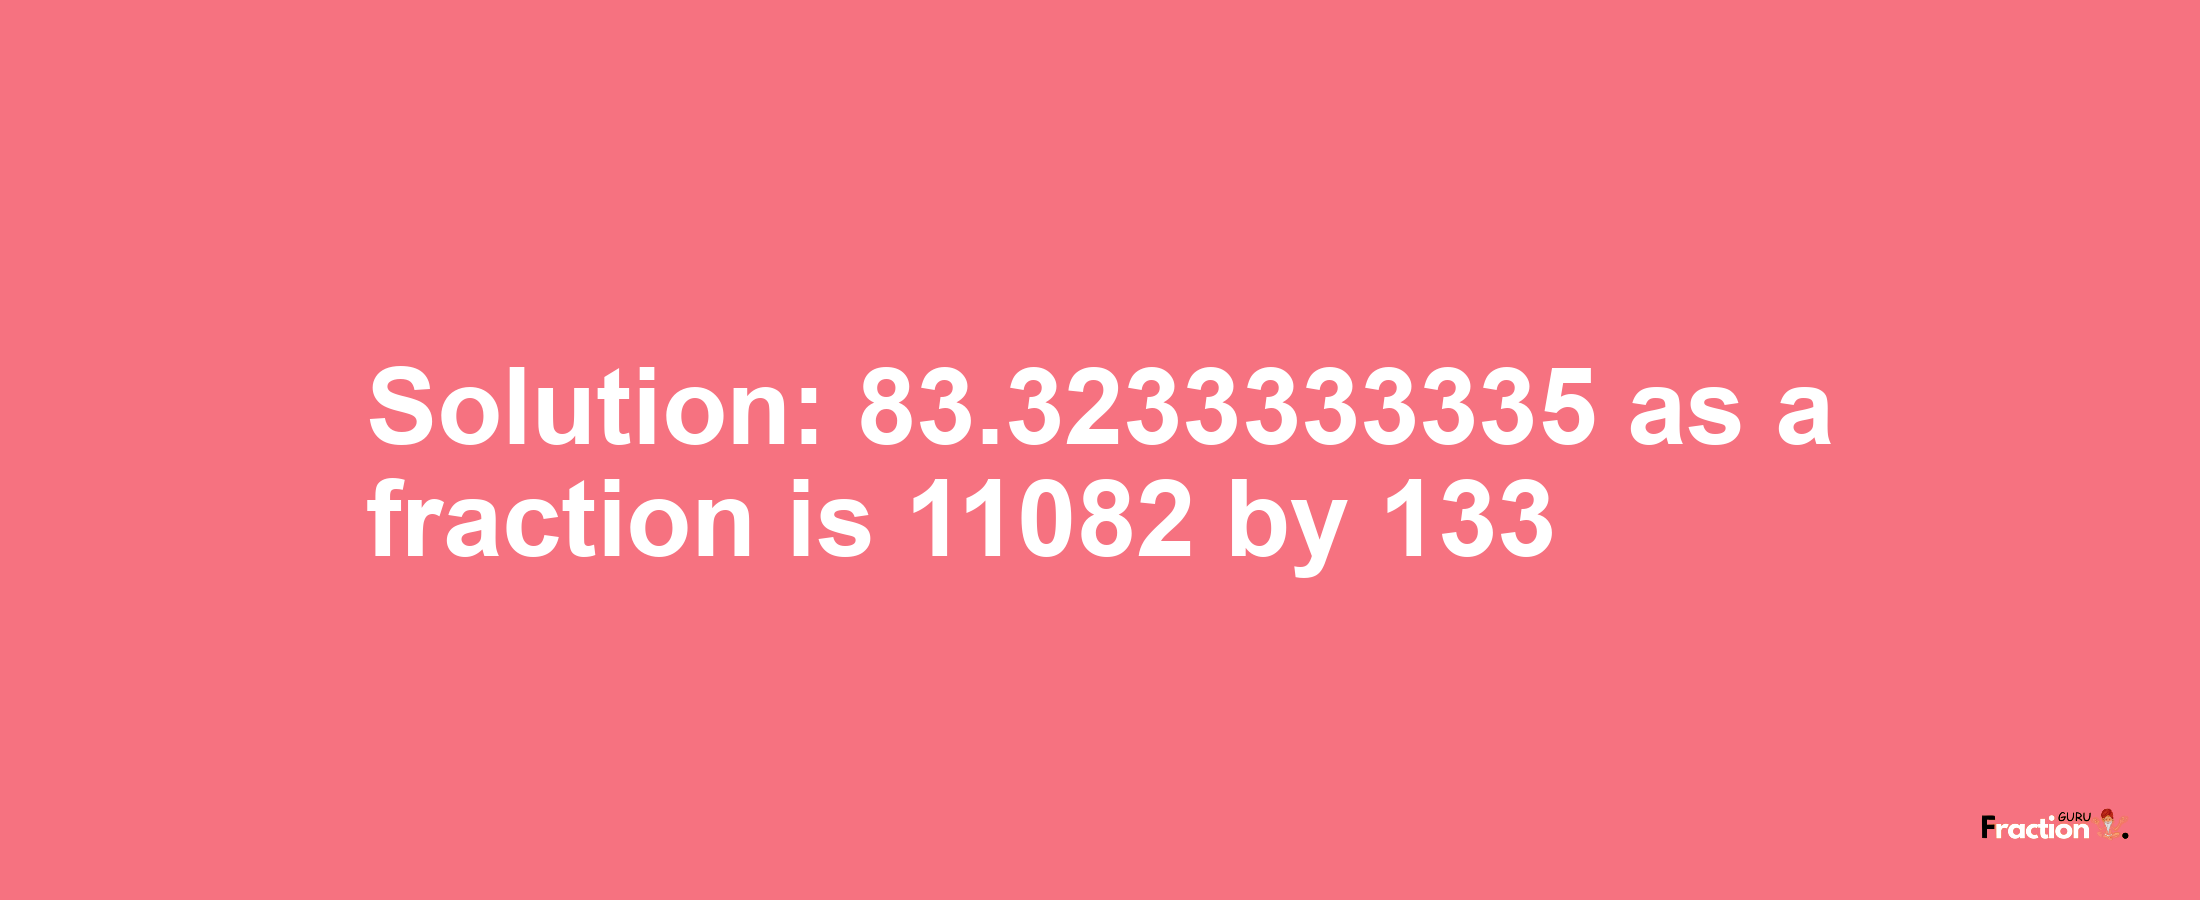 Solution:83.3233333335 as a fraction is 11082/133